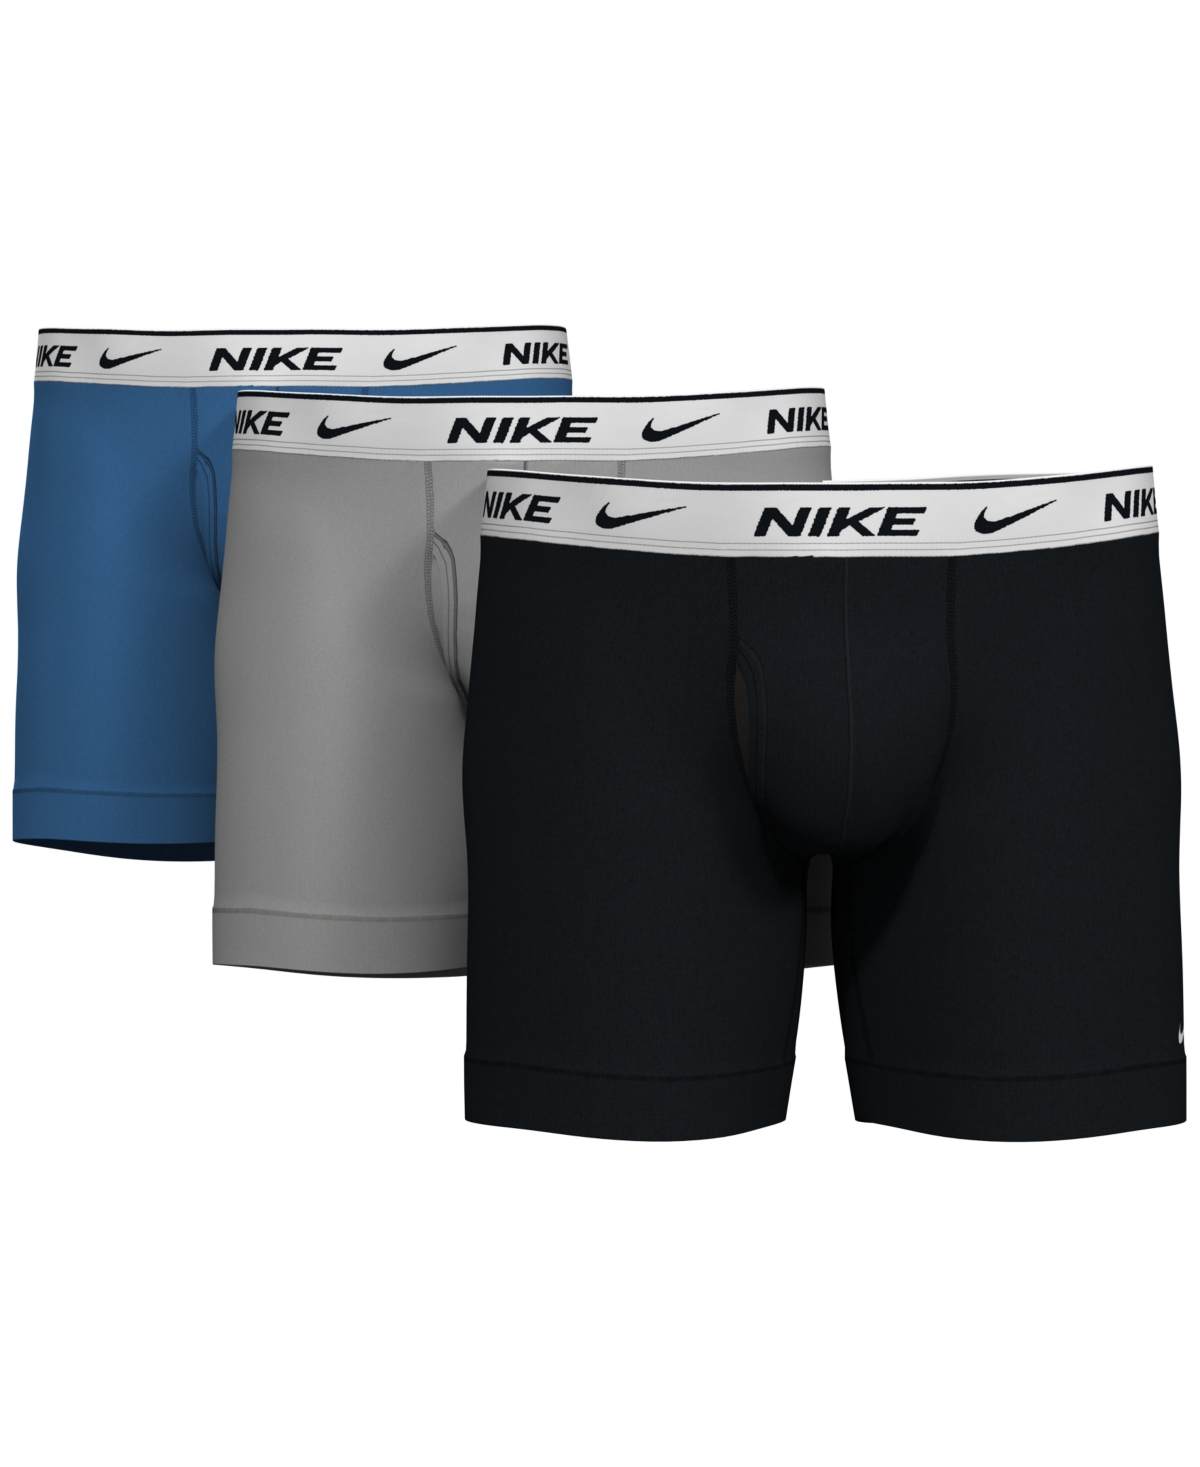 Nike Mens Cotton 3 Pack Brief Boxers - Blue